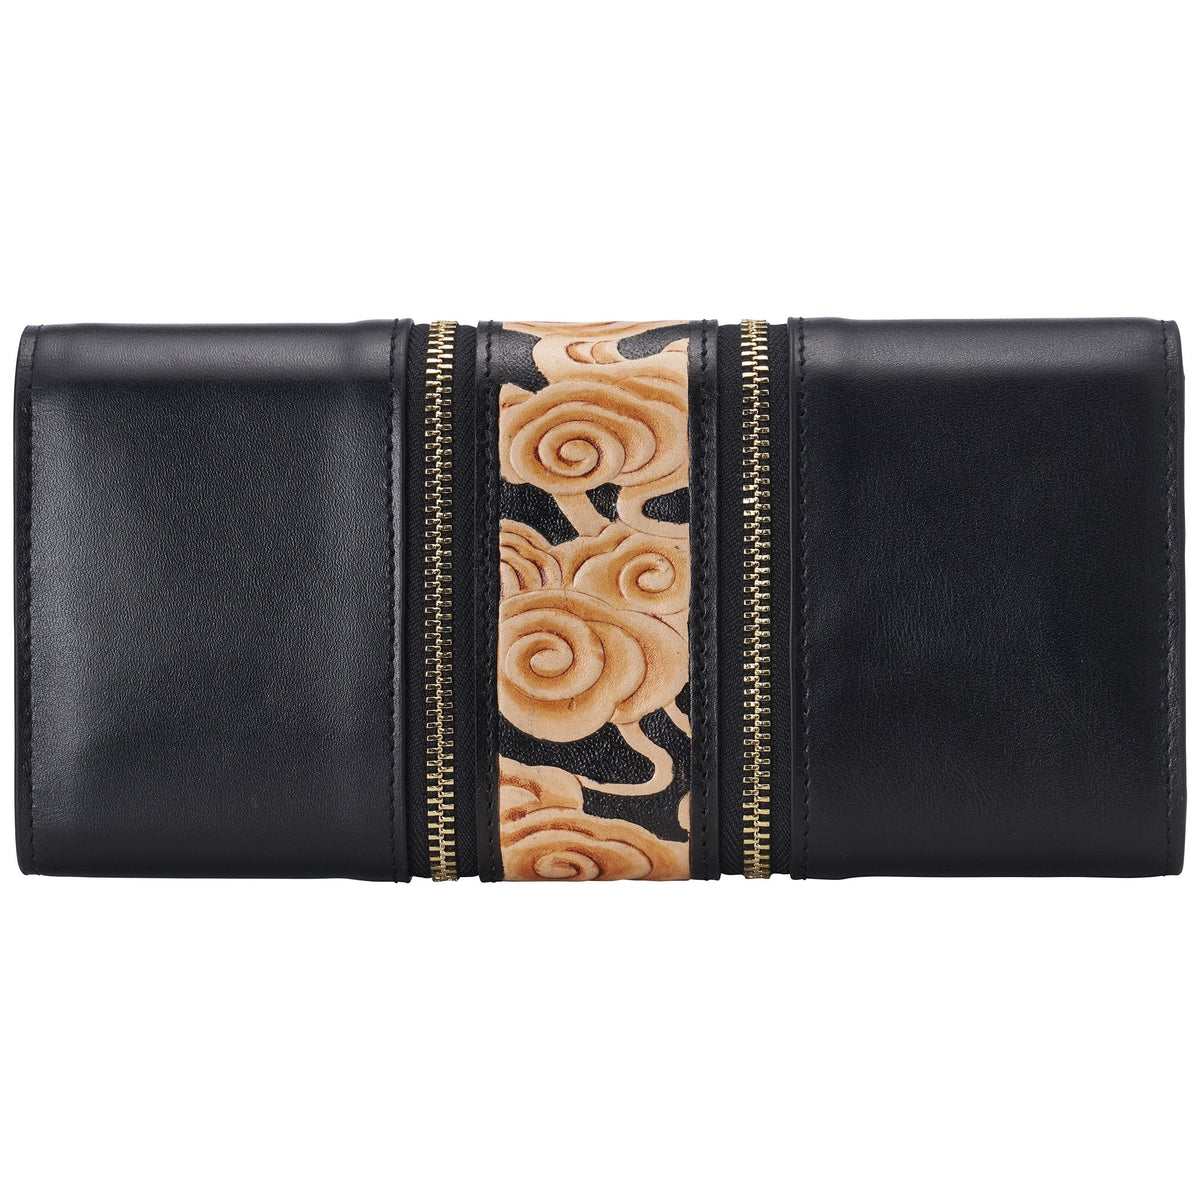 Bags & Luggage - Women's Bags - Wallets Cloud Black Continental Wallet